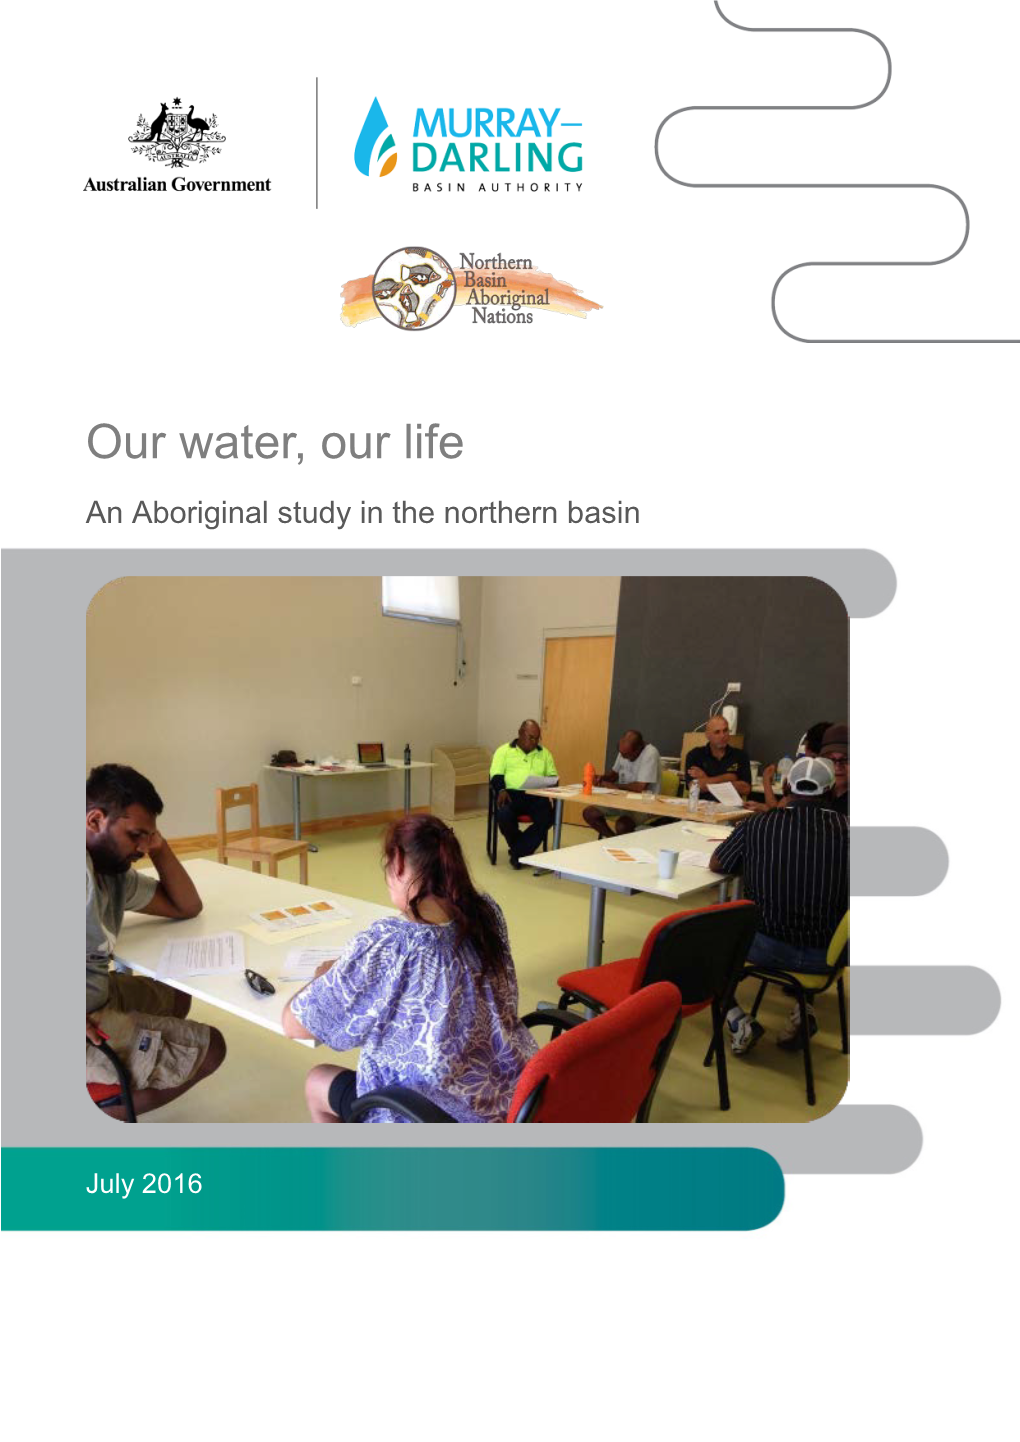 Our Water, Our Life an Aboriginal Study in the Northern Basin